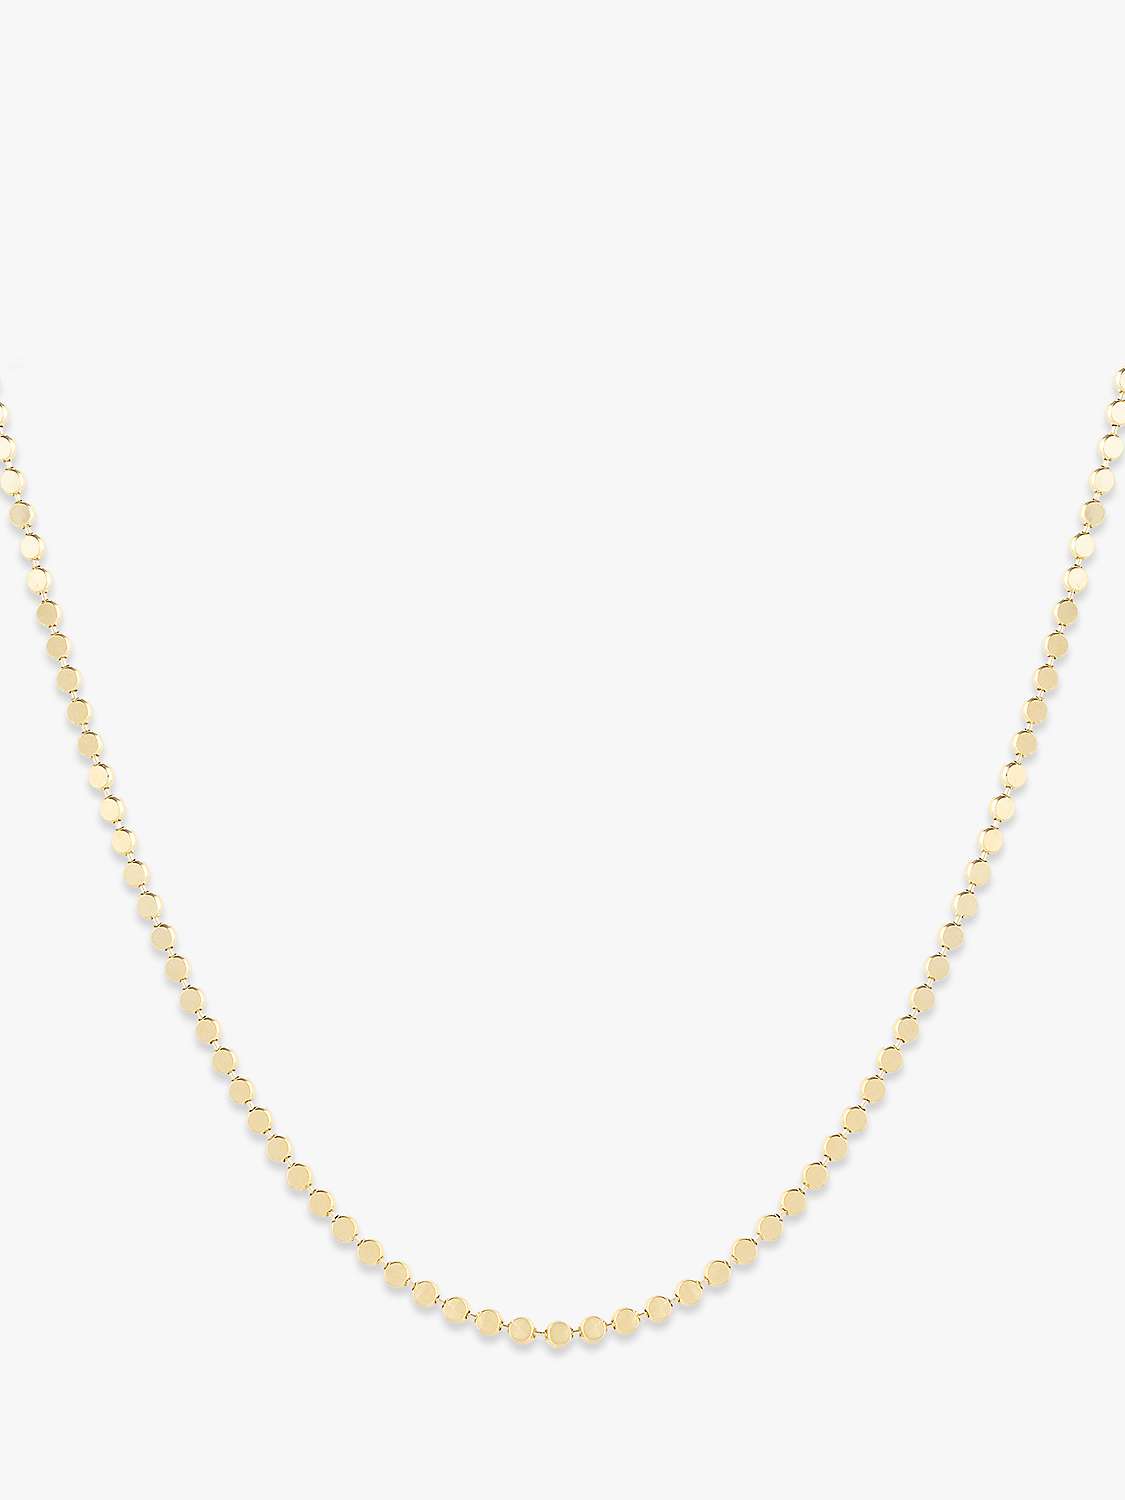 Buy LARNAUTI Classic Beaded Chain Necklace, Gold Online at johnlewis.com